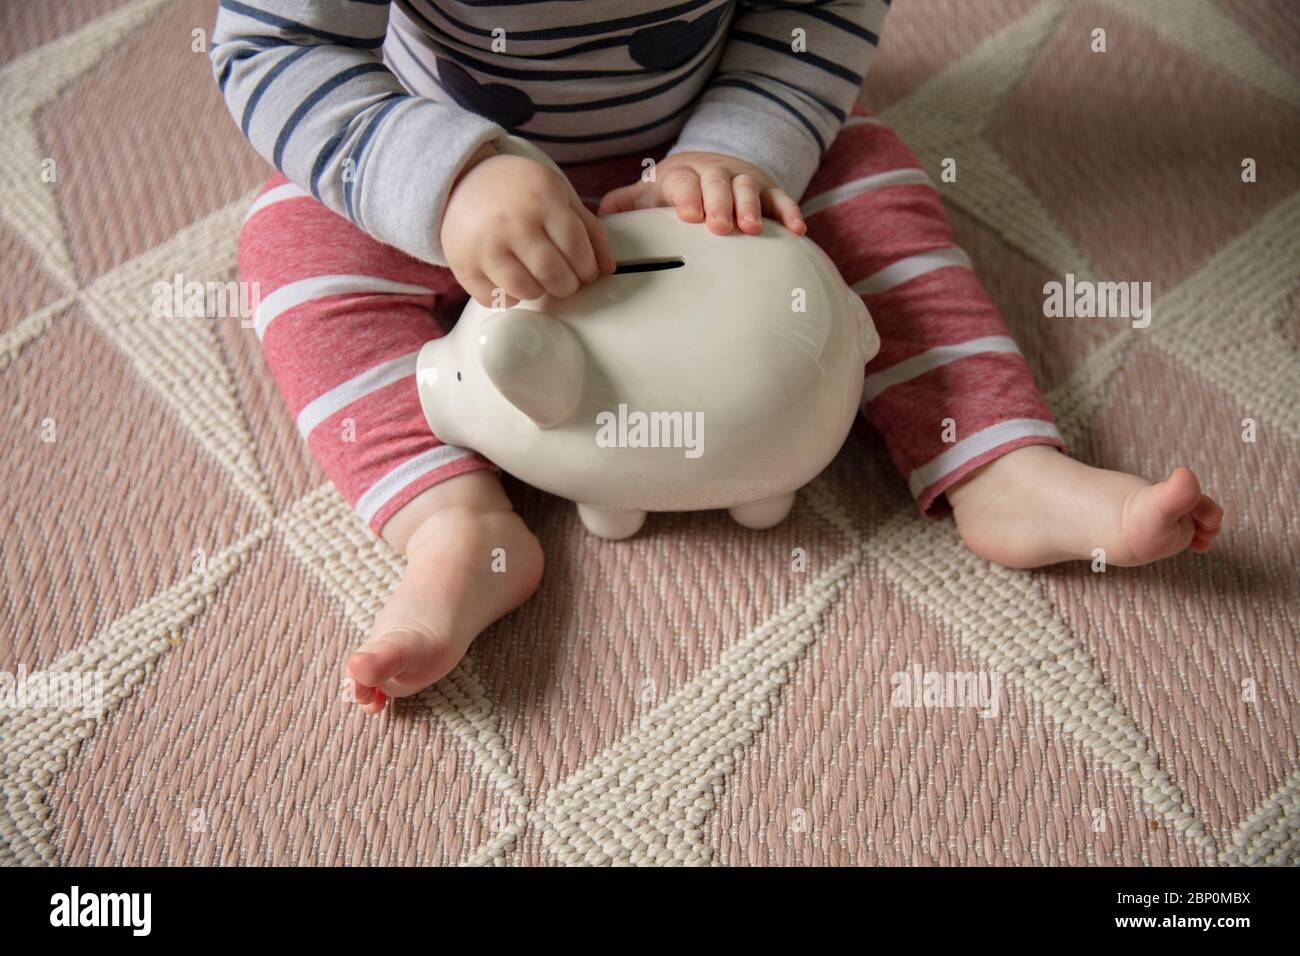 A baby puts money into a piggy bank saving for their future Stock Photo